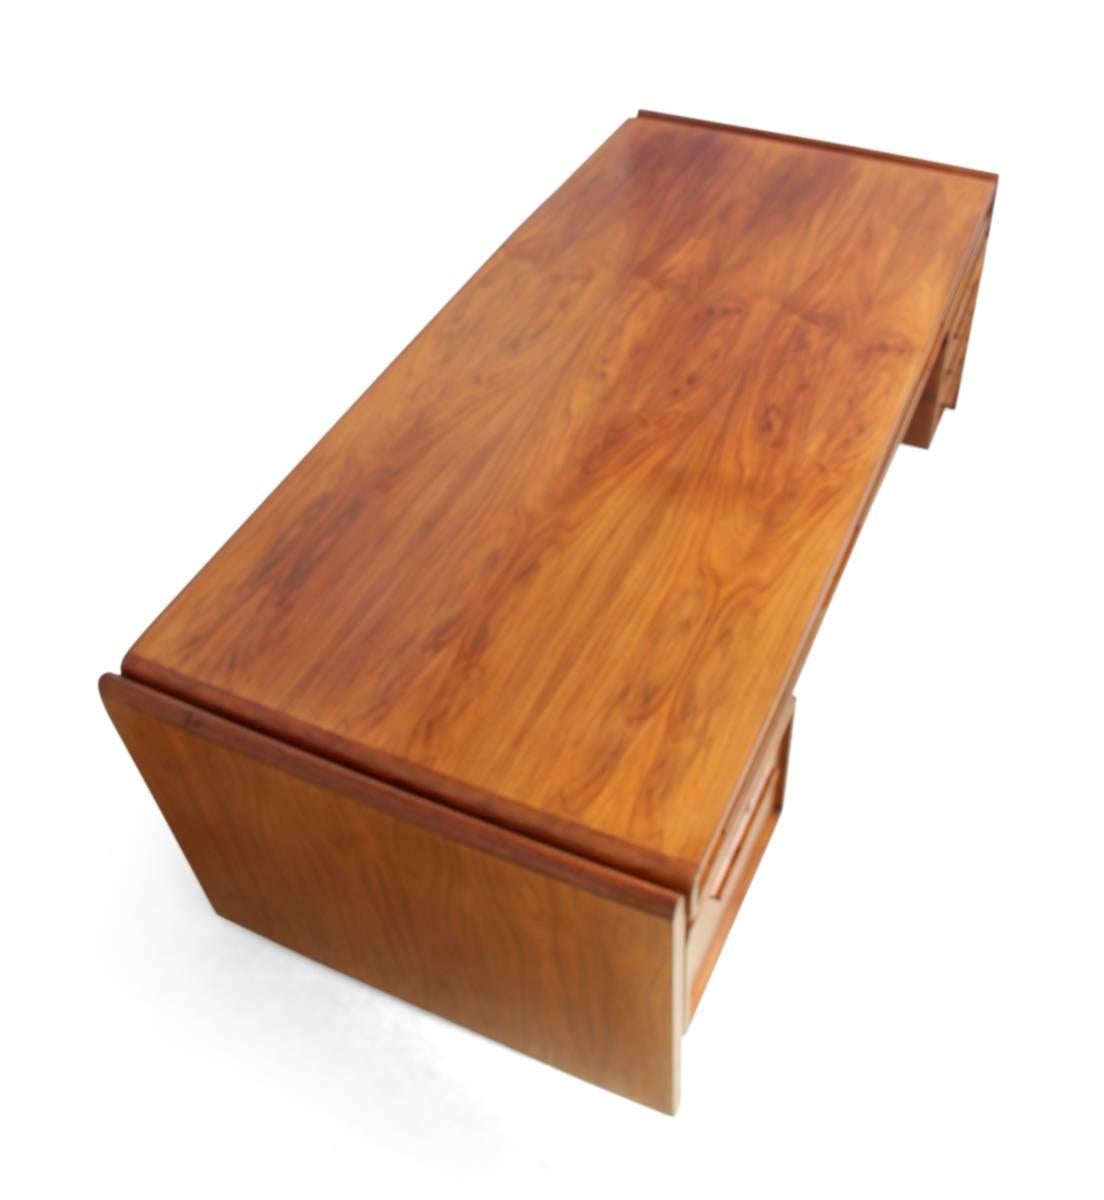 Mid-Century skyline desk by Dyrlund
Top of the range executive desk that was designed and produced in house by Dyrlund, this skyline desk has both suspended pedestals one with three drawers the other is a file suspension drawer, the desk has had